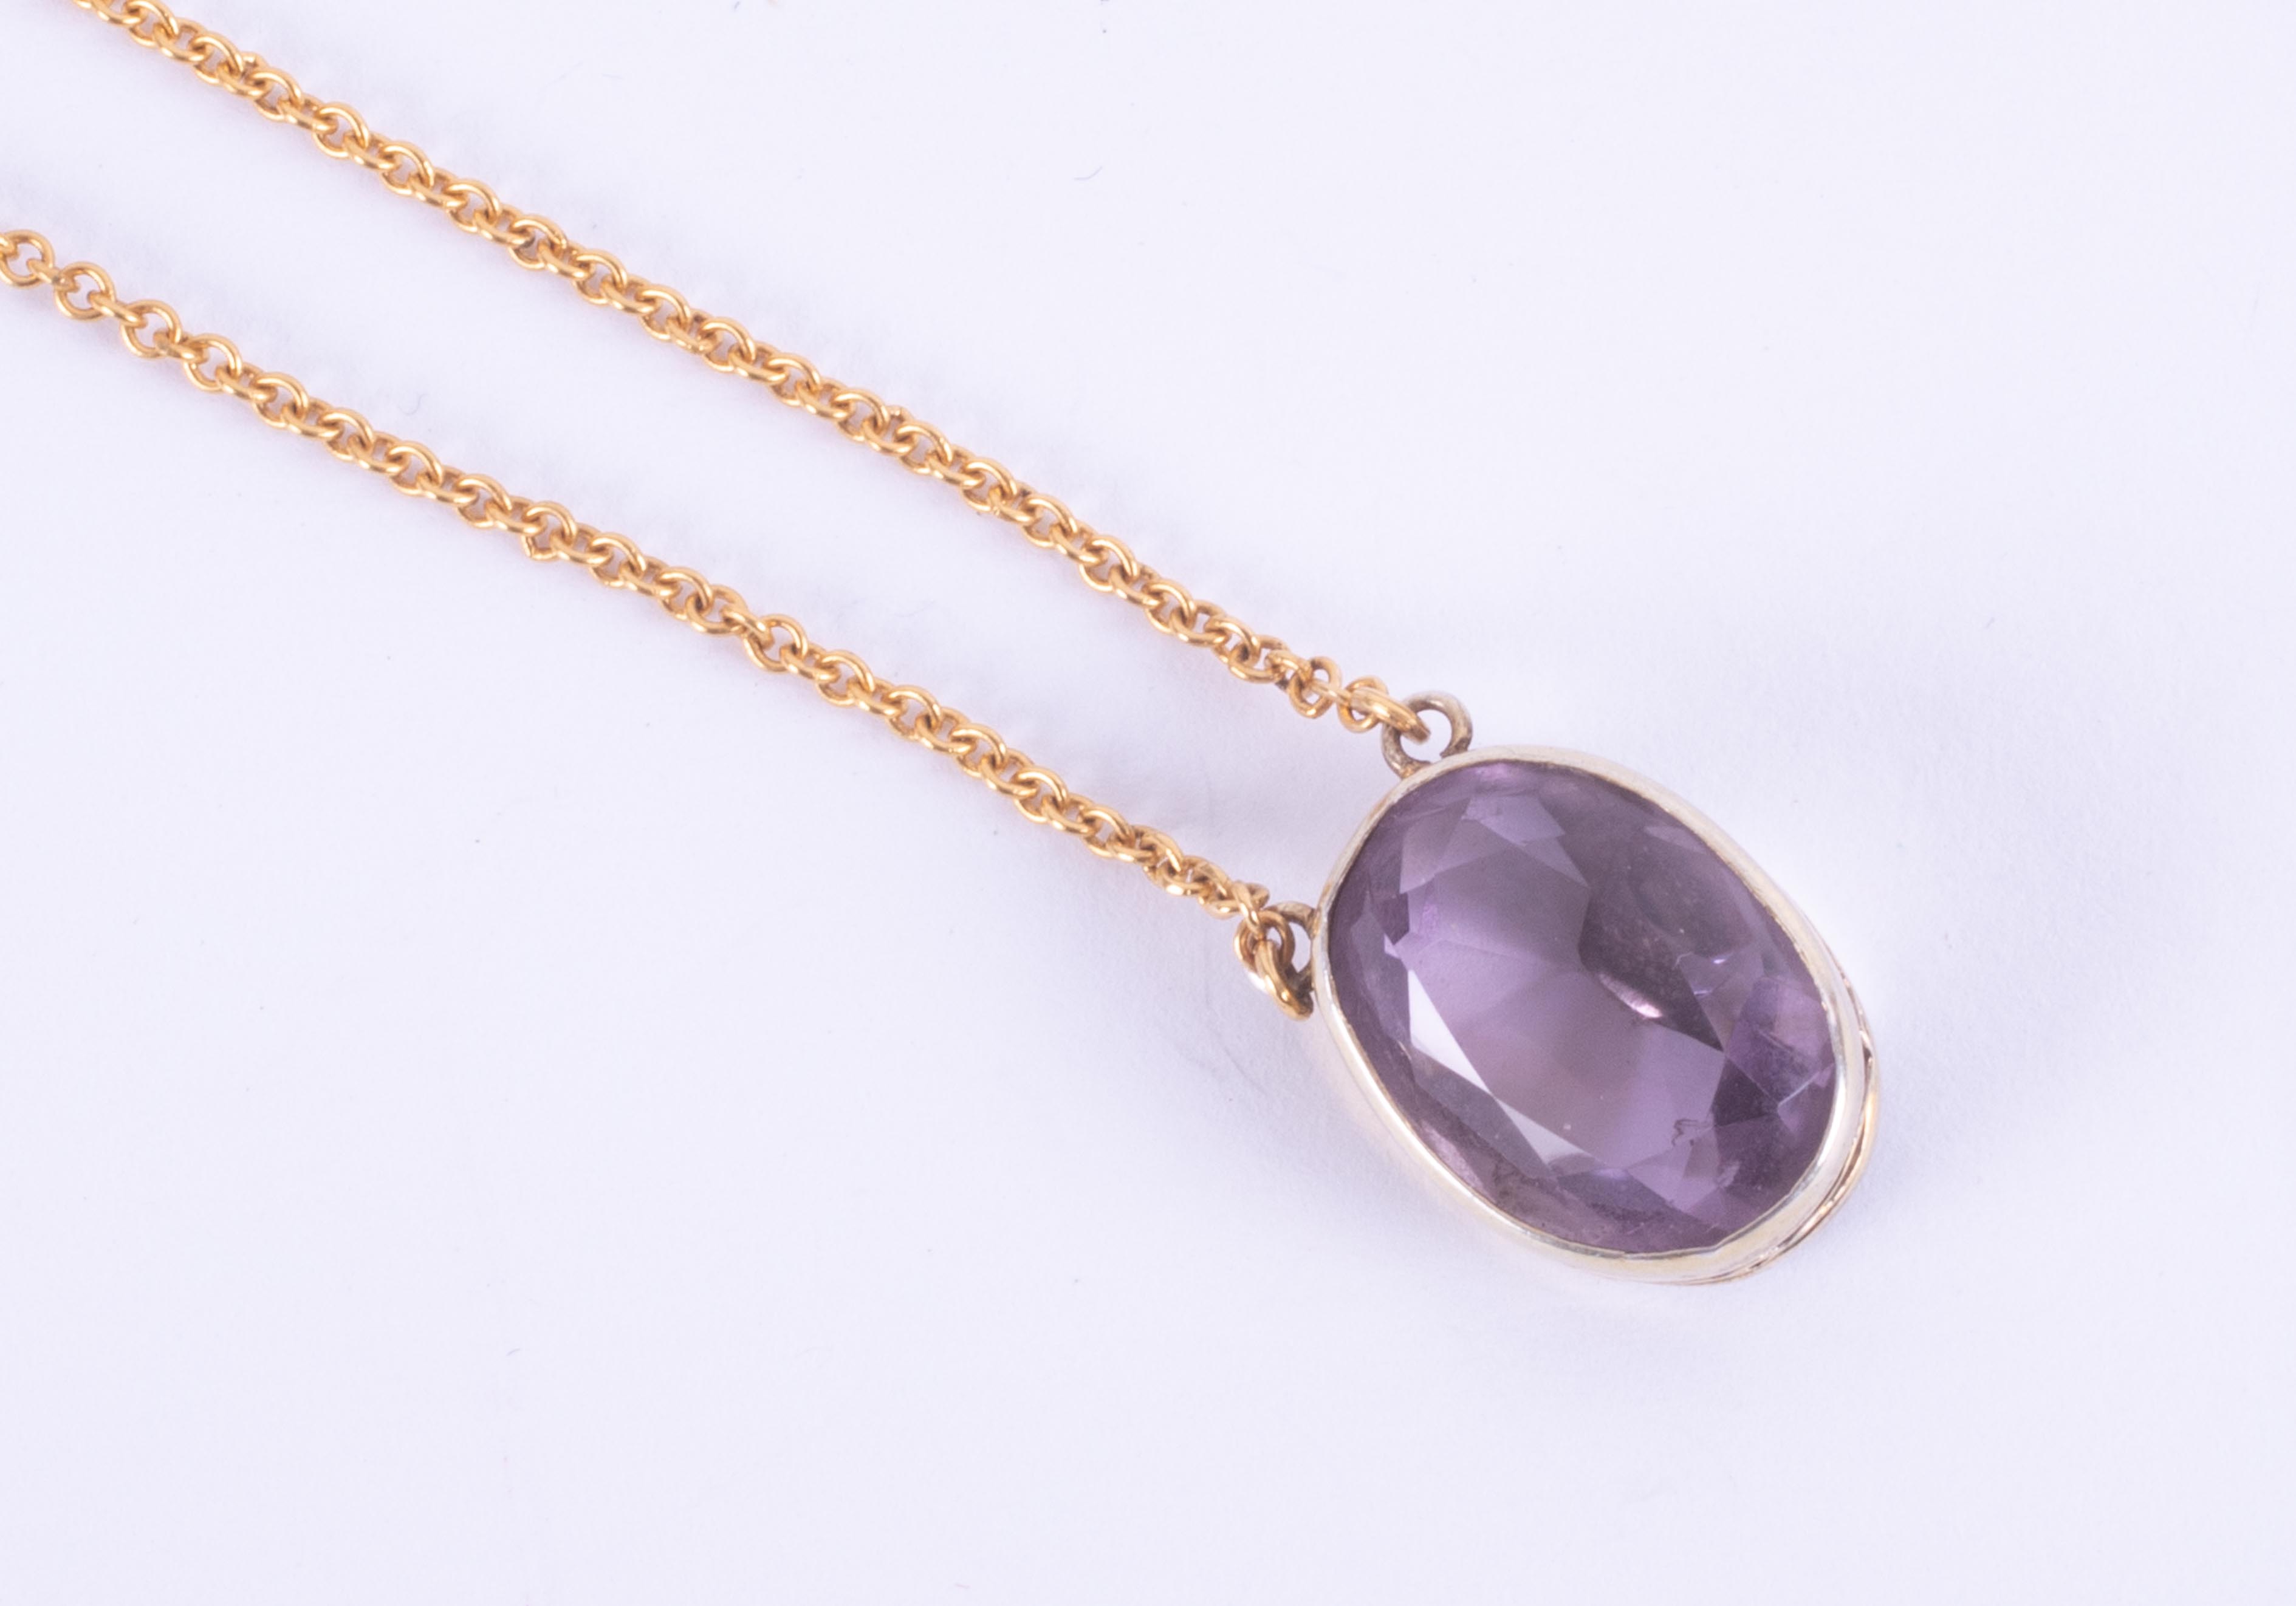 A 9ct yellow gold pendant set with an oval cut amethyst measuring approx. 15mm x 11mm on a yellow